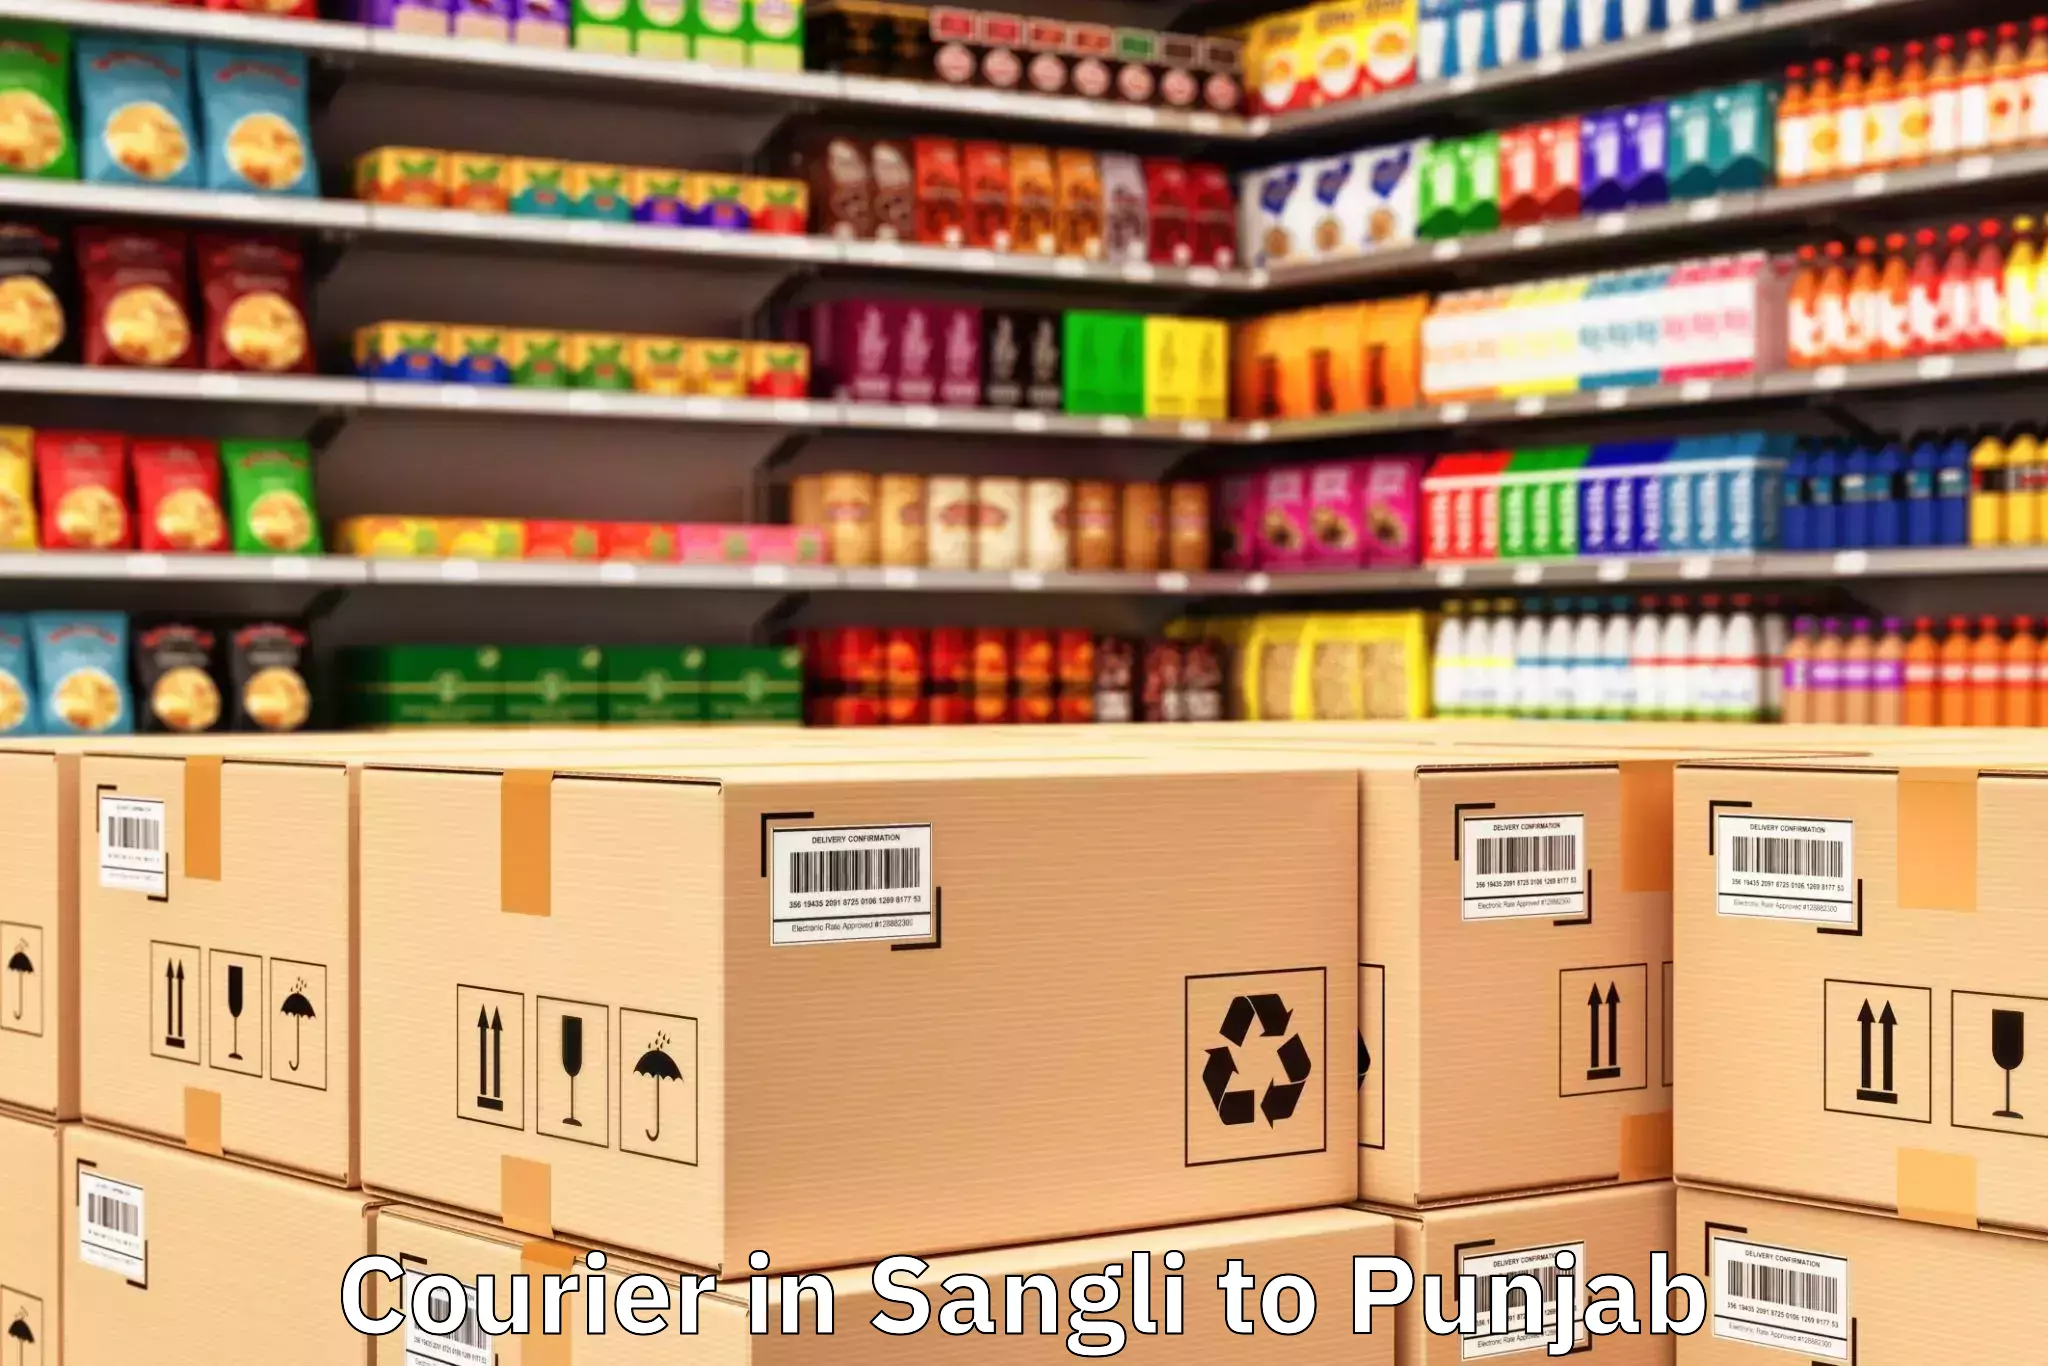 Trusted Sangli to Punjab Courier